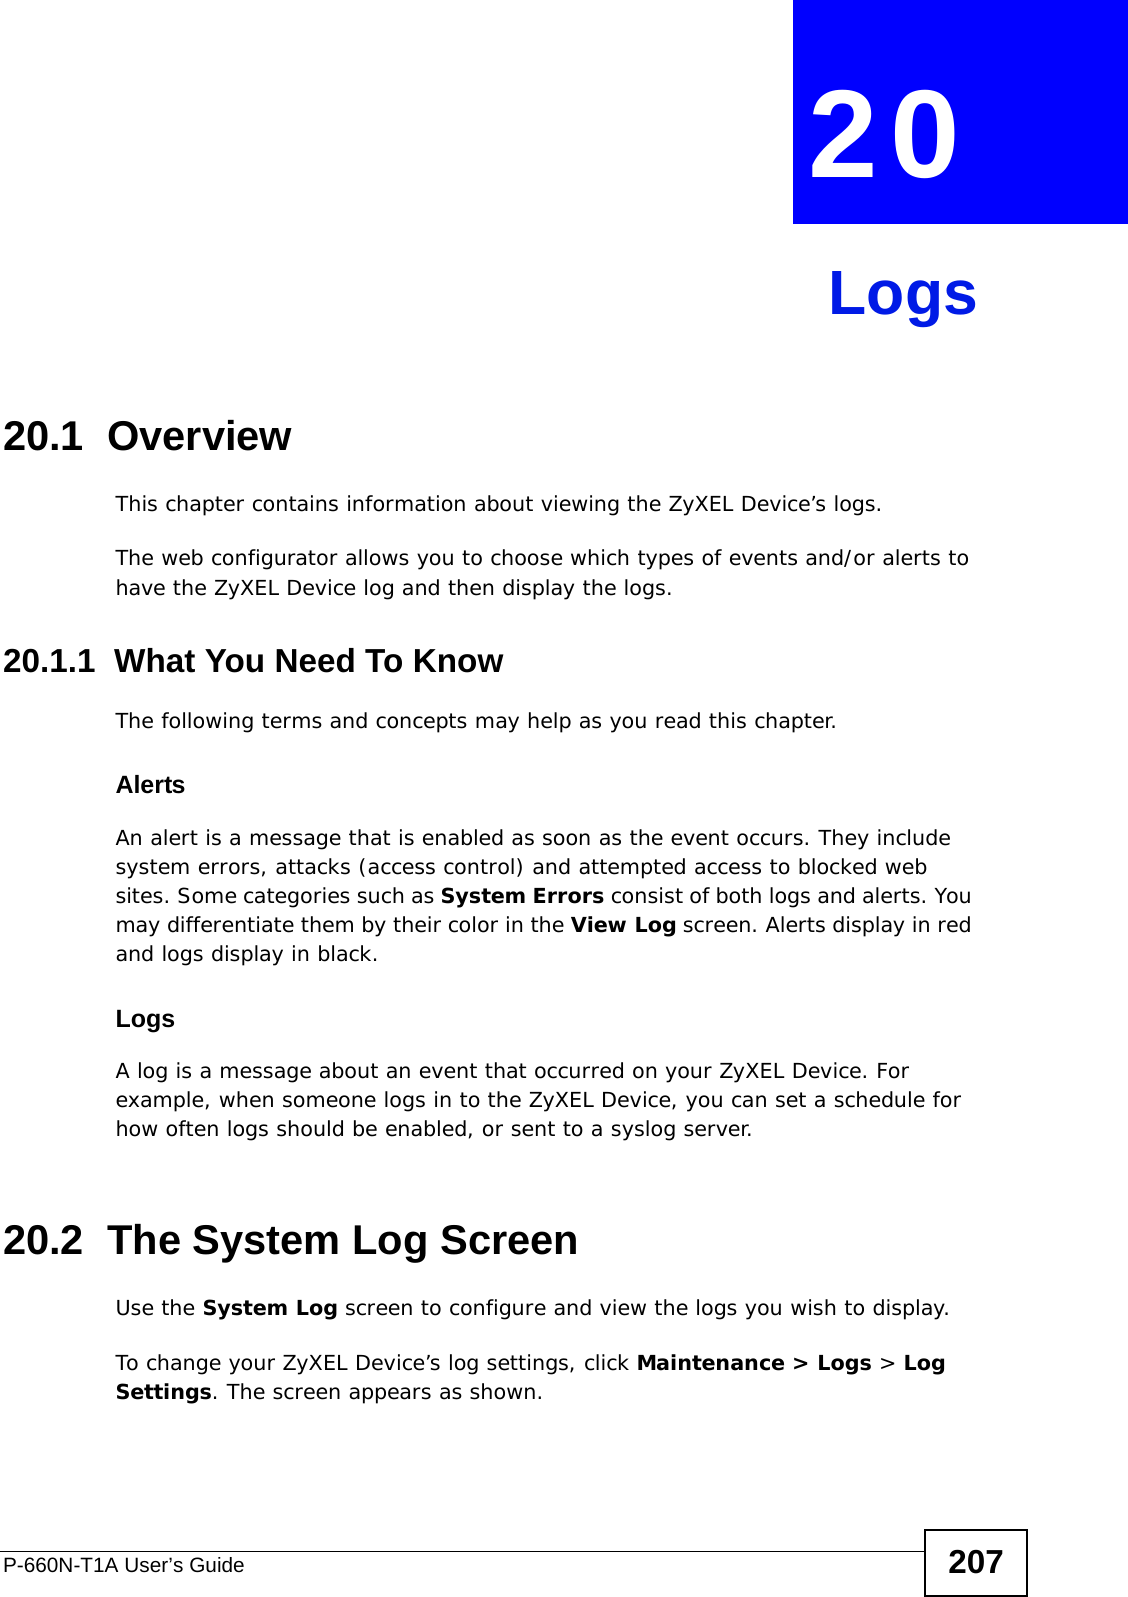 P-660N-T1A User’s Guide 207CHAPTER  20 Logs20.1  OverviewThis chapter contains information about viewing the ZyXEL Device’s logs.The web configurator allows you to choose which types of events and/or alerts to have the ZyXEL Device log and then display the logs. 20.1.1  What You Need To KnowThe following terms and concepts may help as you read this chapter.AlertsAn alert is a message that is enabled as soon as the event occurs. They include system errors, attacks (access control) and attempted access to blocked web sites. Some categories such as System Errors consist of both logs and alerts. You may differentiate them by their color in the View Log screen. Alerts display in red and logs display in black.LogsA log is a message about an event that occurred on your ZyXEL Device. For example, when someone logs in to the ZyXEL Device, you can set a schedule for how often logs should be enabled, or sent to a syslog server.20.2  The System Log ScreenUse the System Log screen to configure and view the logs you wish to display.To change your ZyXEL Device’s log settings, click Maintenance &gt; Logs &gt; Log Settings. The screen appears as shown.